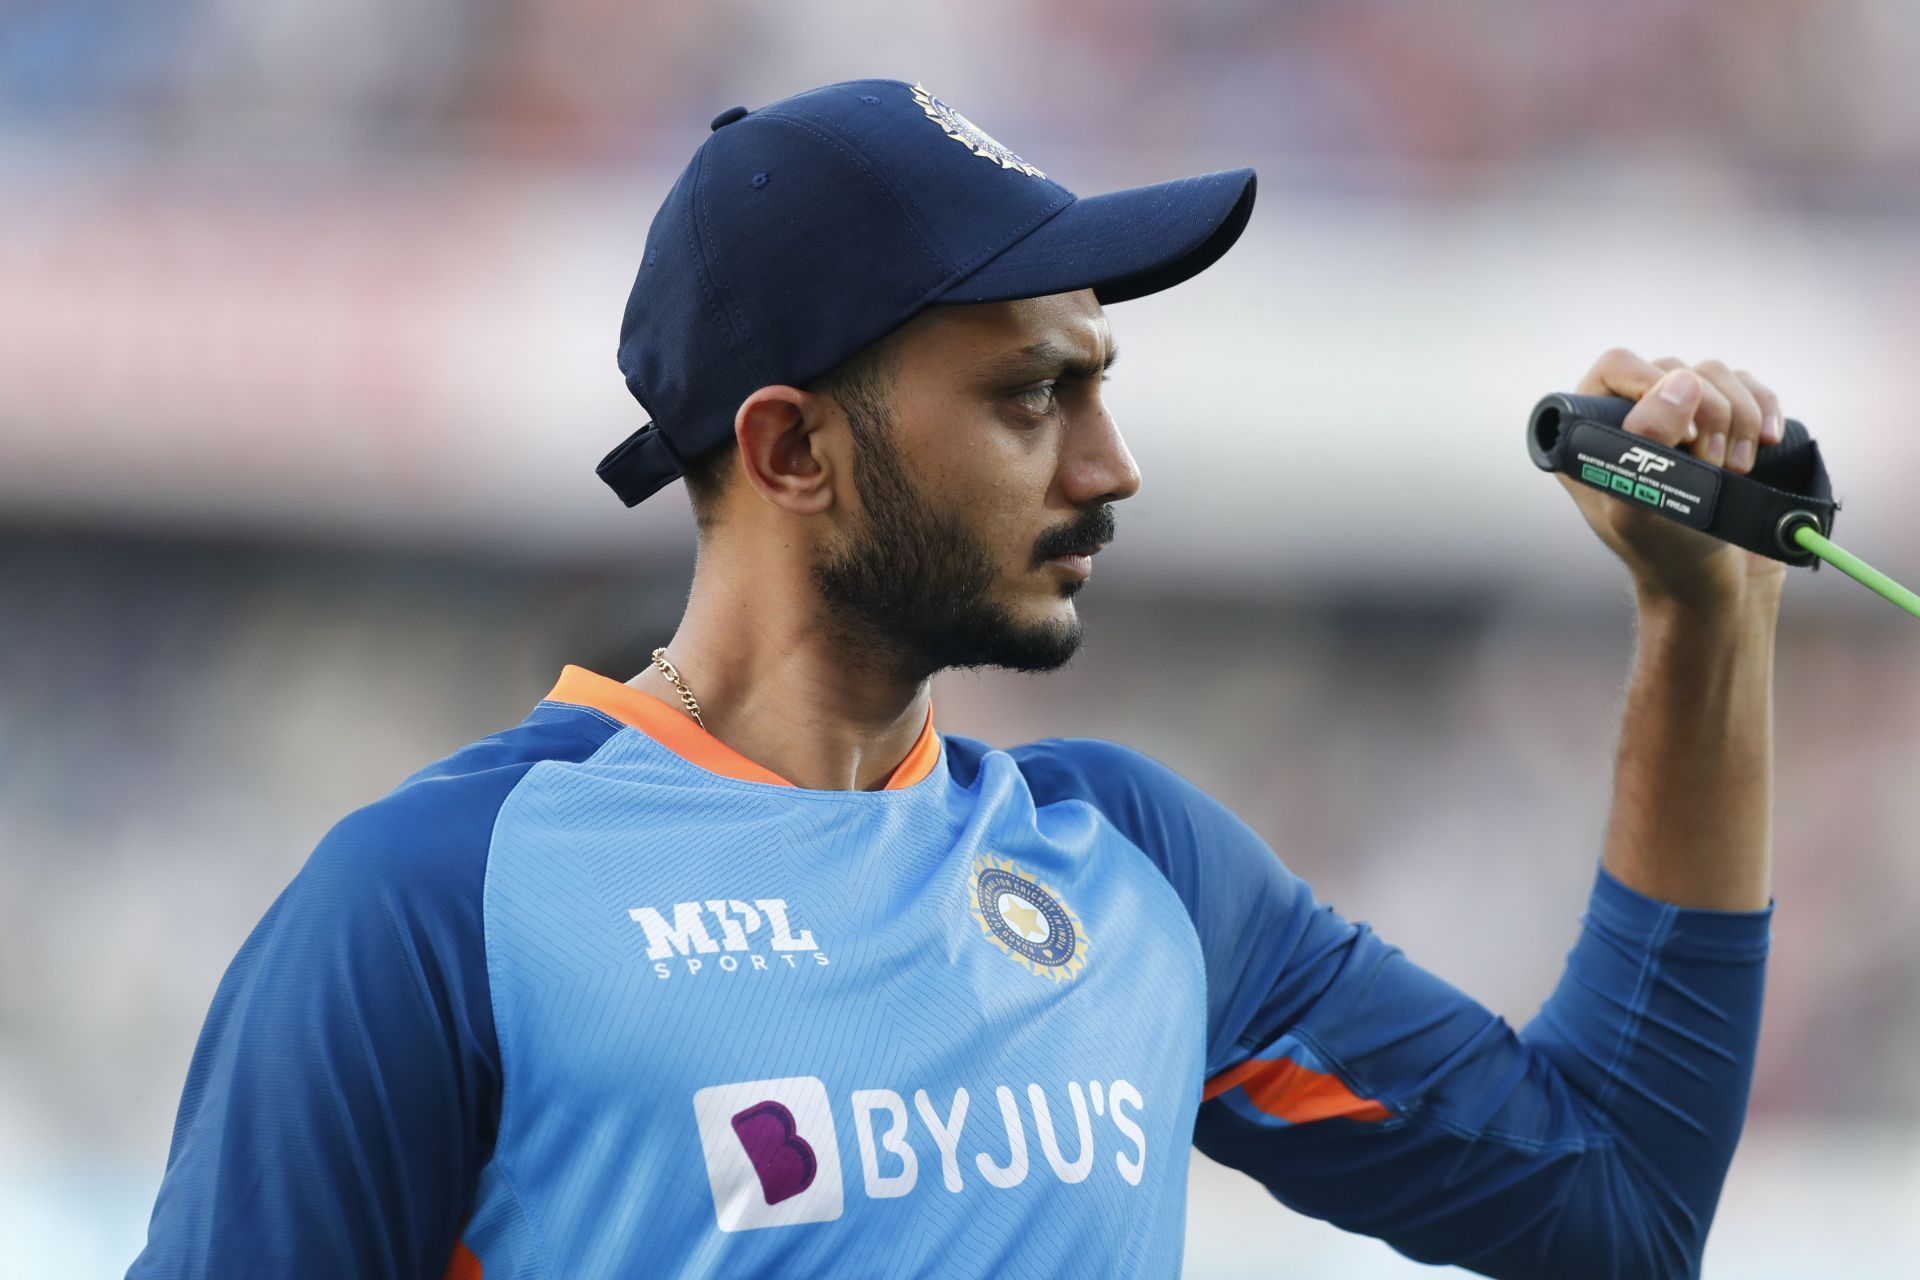 Axar Patel has made a comeback to the Indian side